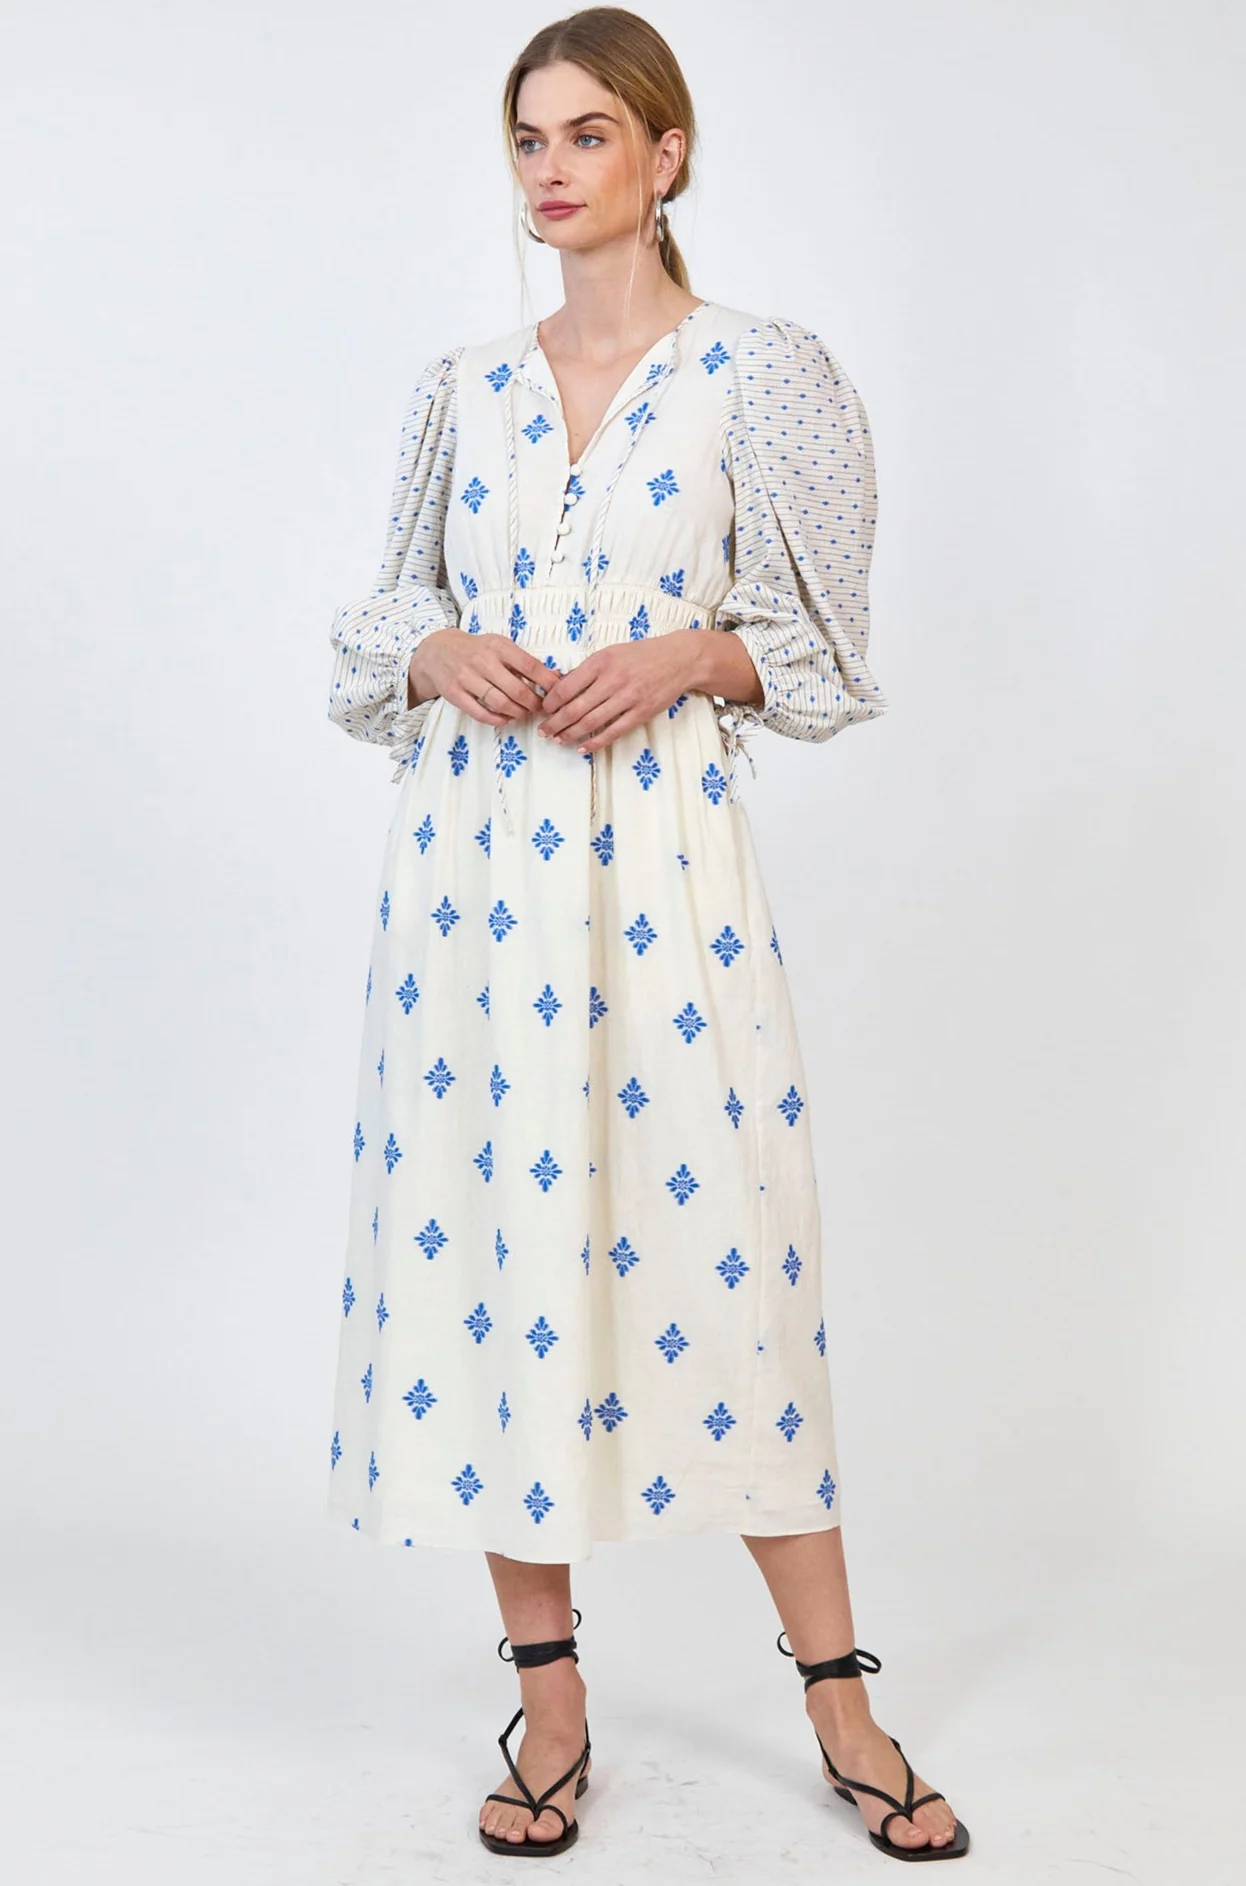 blue and white favorite spring dress